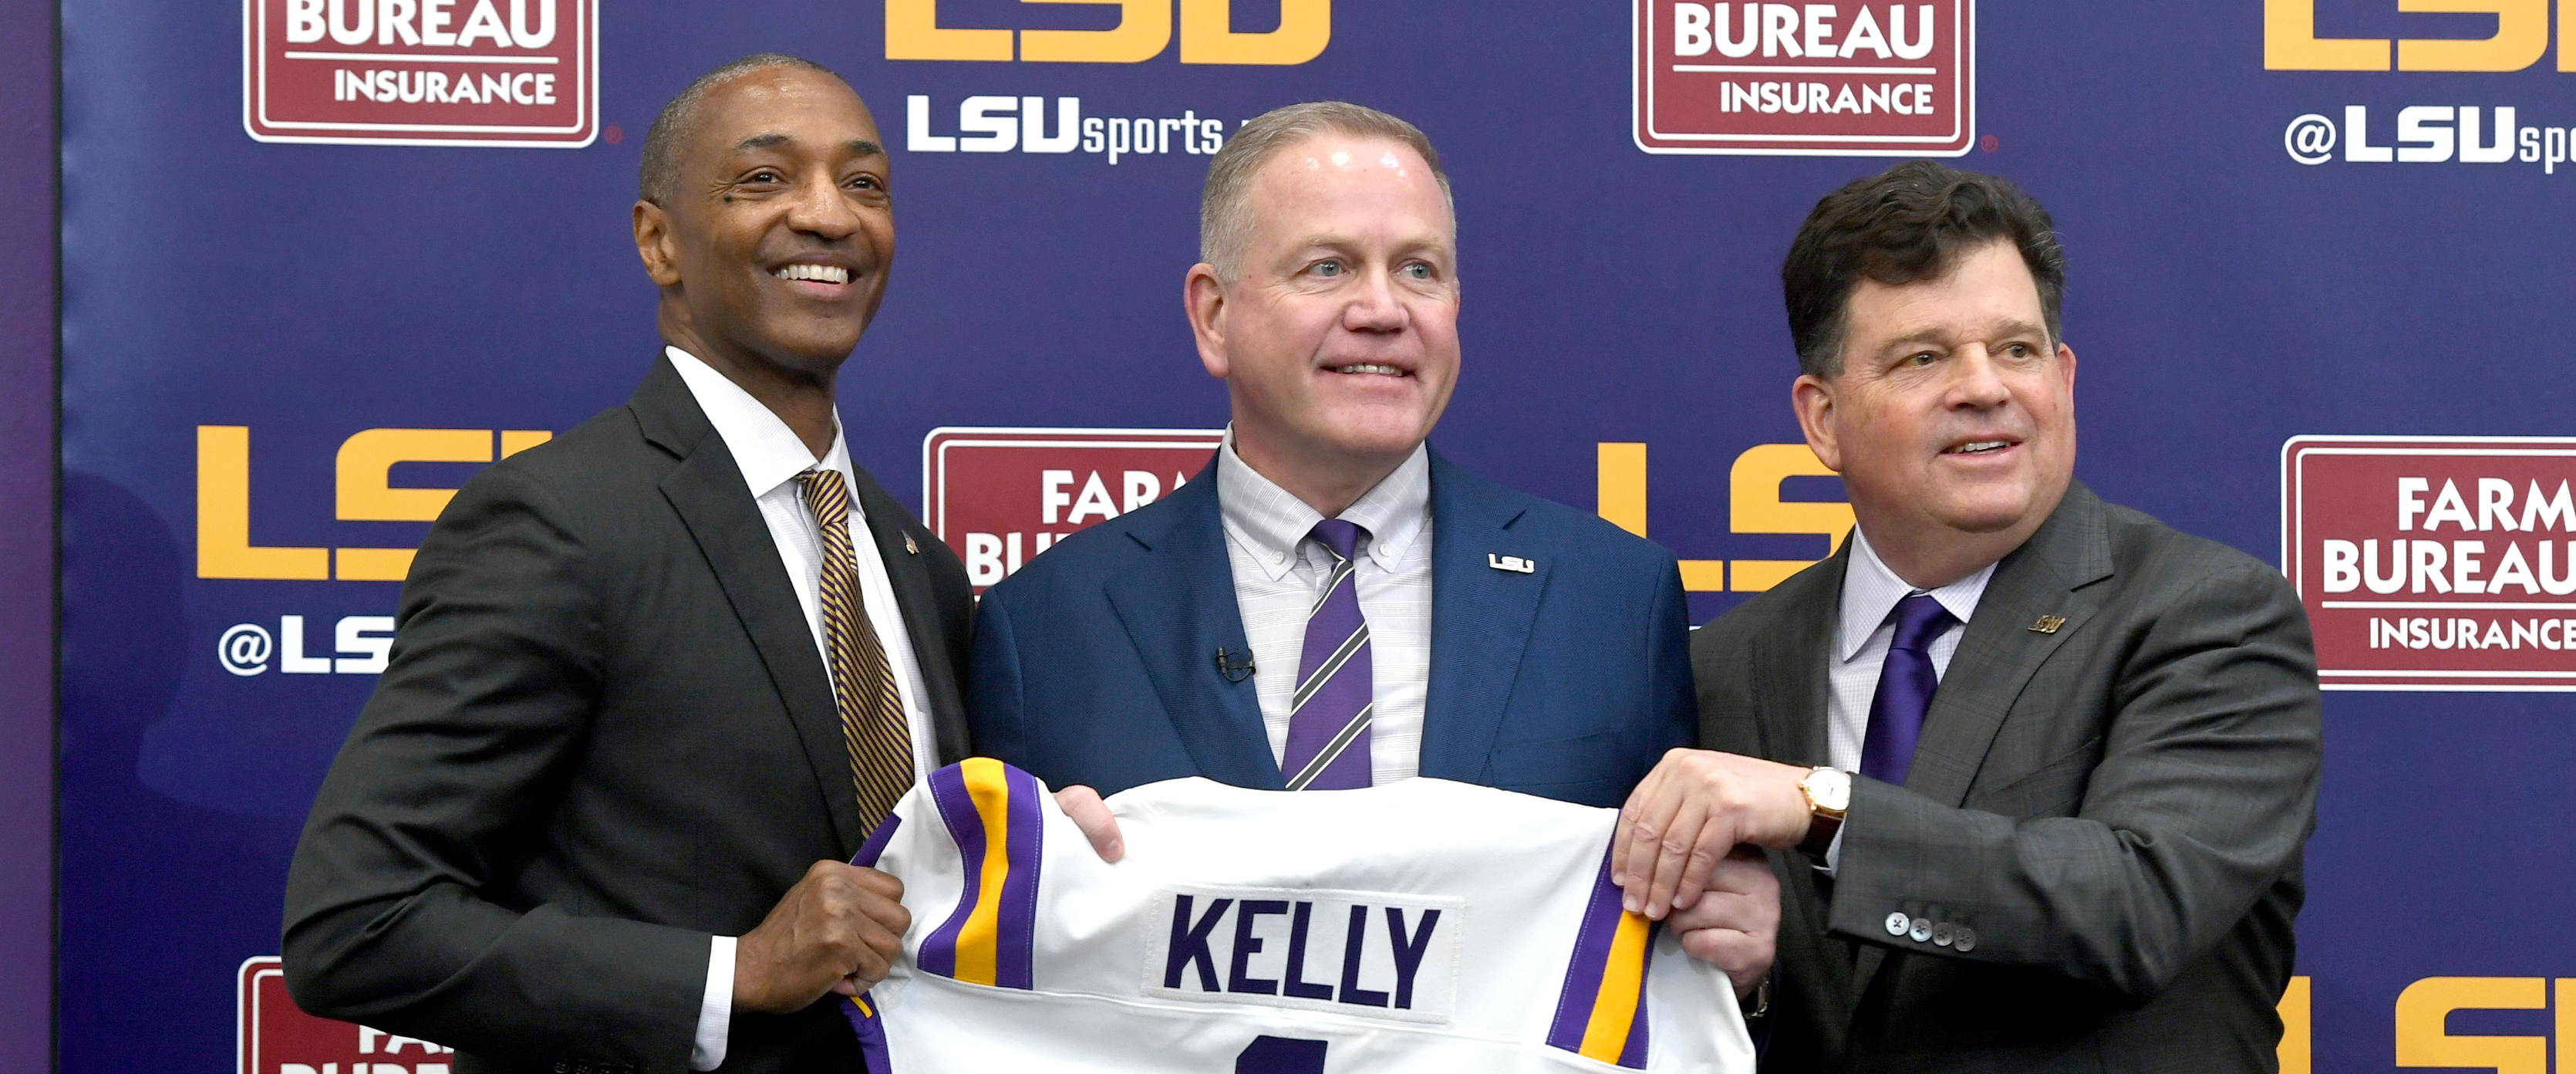 The recruit Brian Kelly was dancing with committed to LSU's rival...